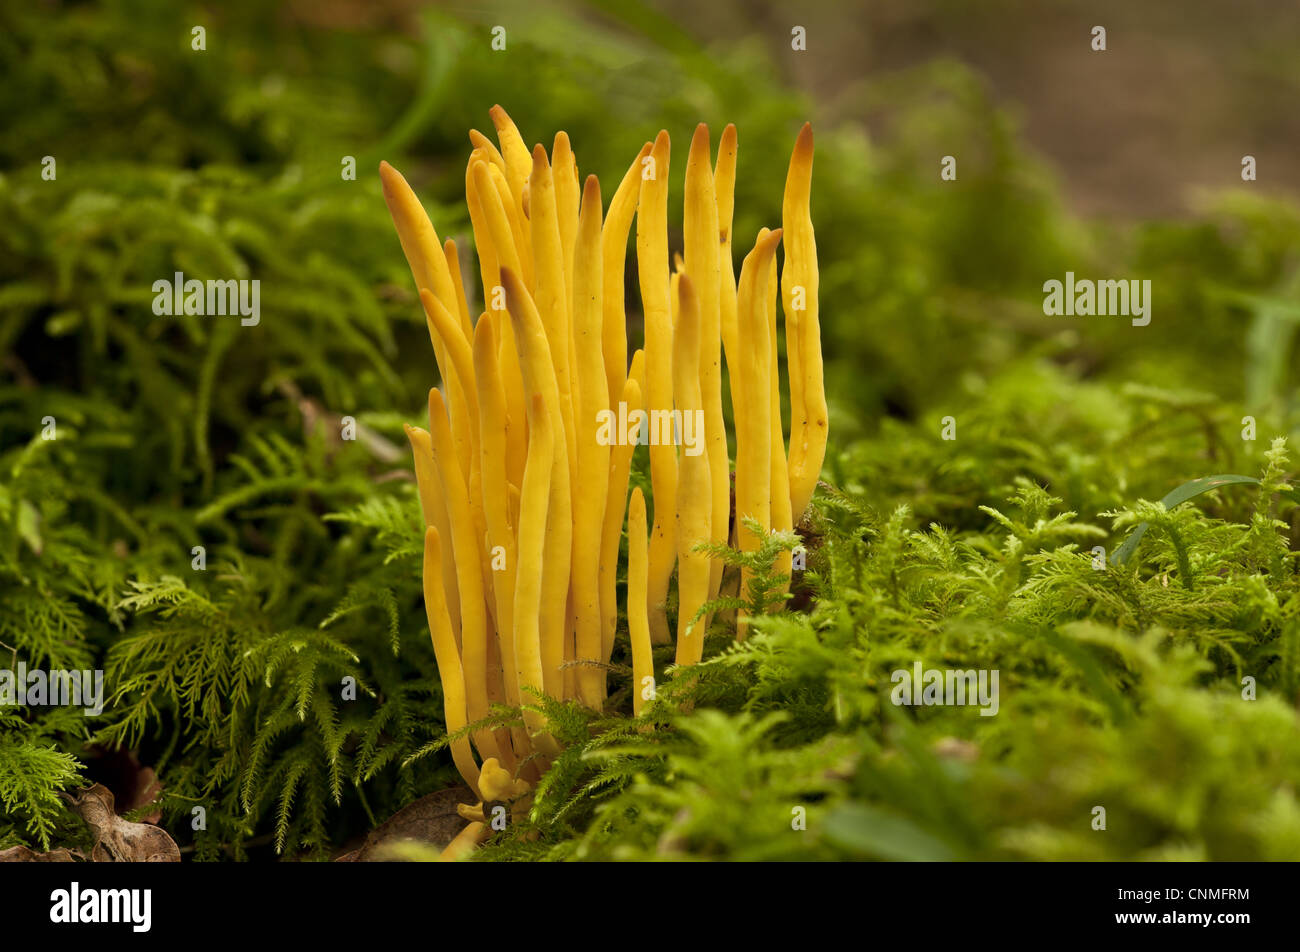 Golden Spindles Clavulinopsis fusiformis fruiting bodies growing amongst moss bank old woodland Wiltshire England september Stock Photo